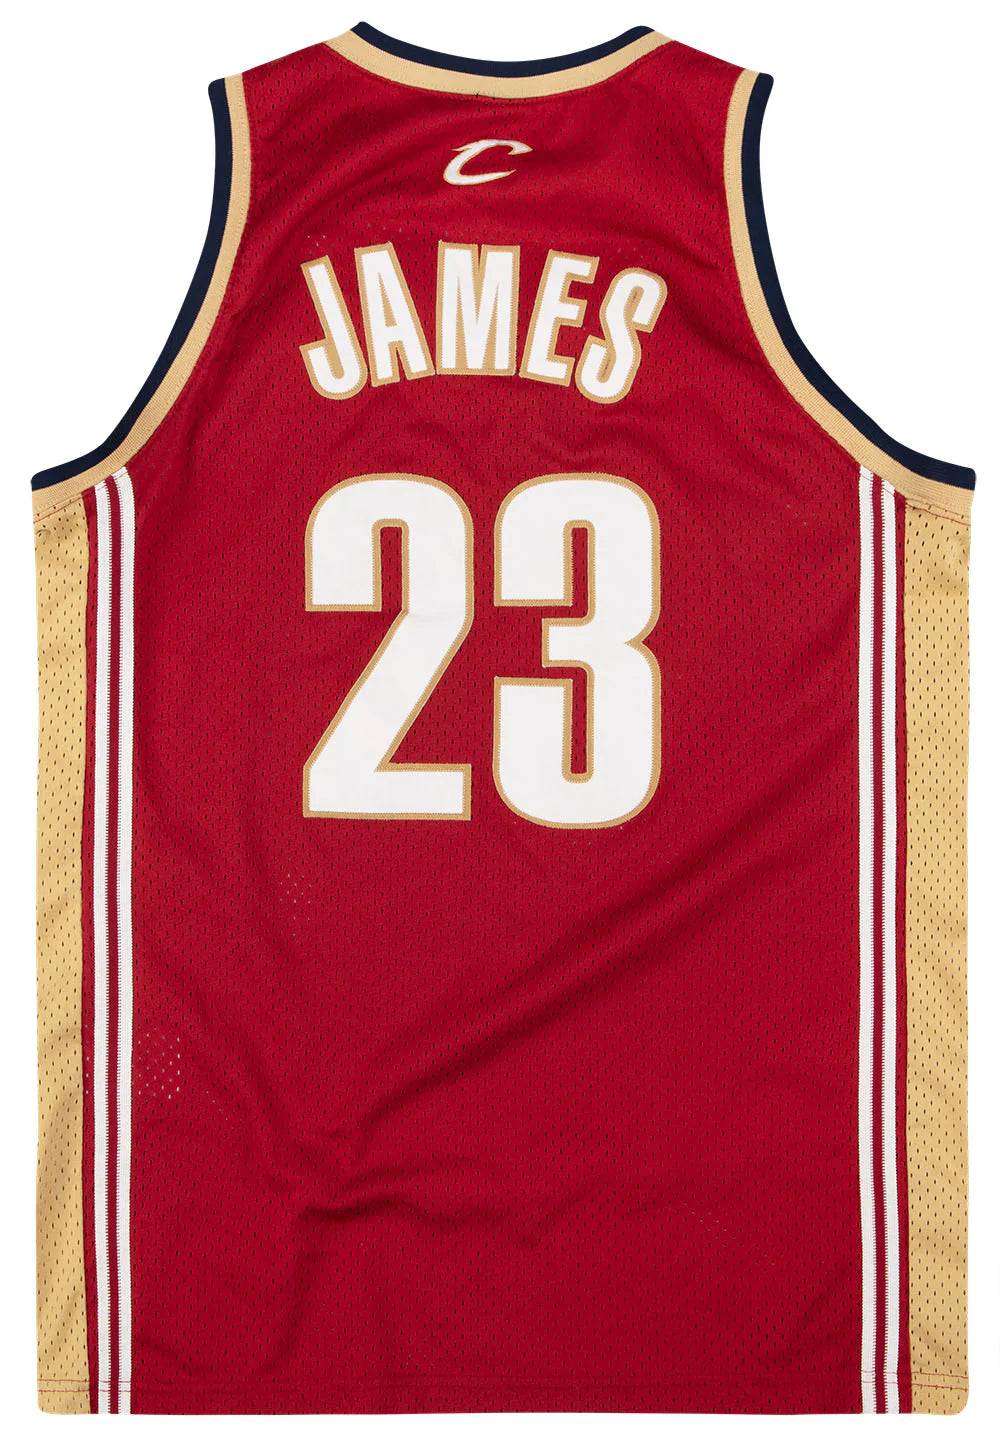 NBA Authentic Jersey Cleveland Cavaliers 2003-04 LeBron James #23